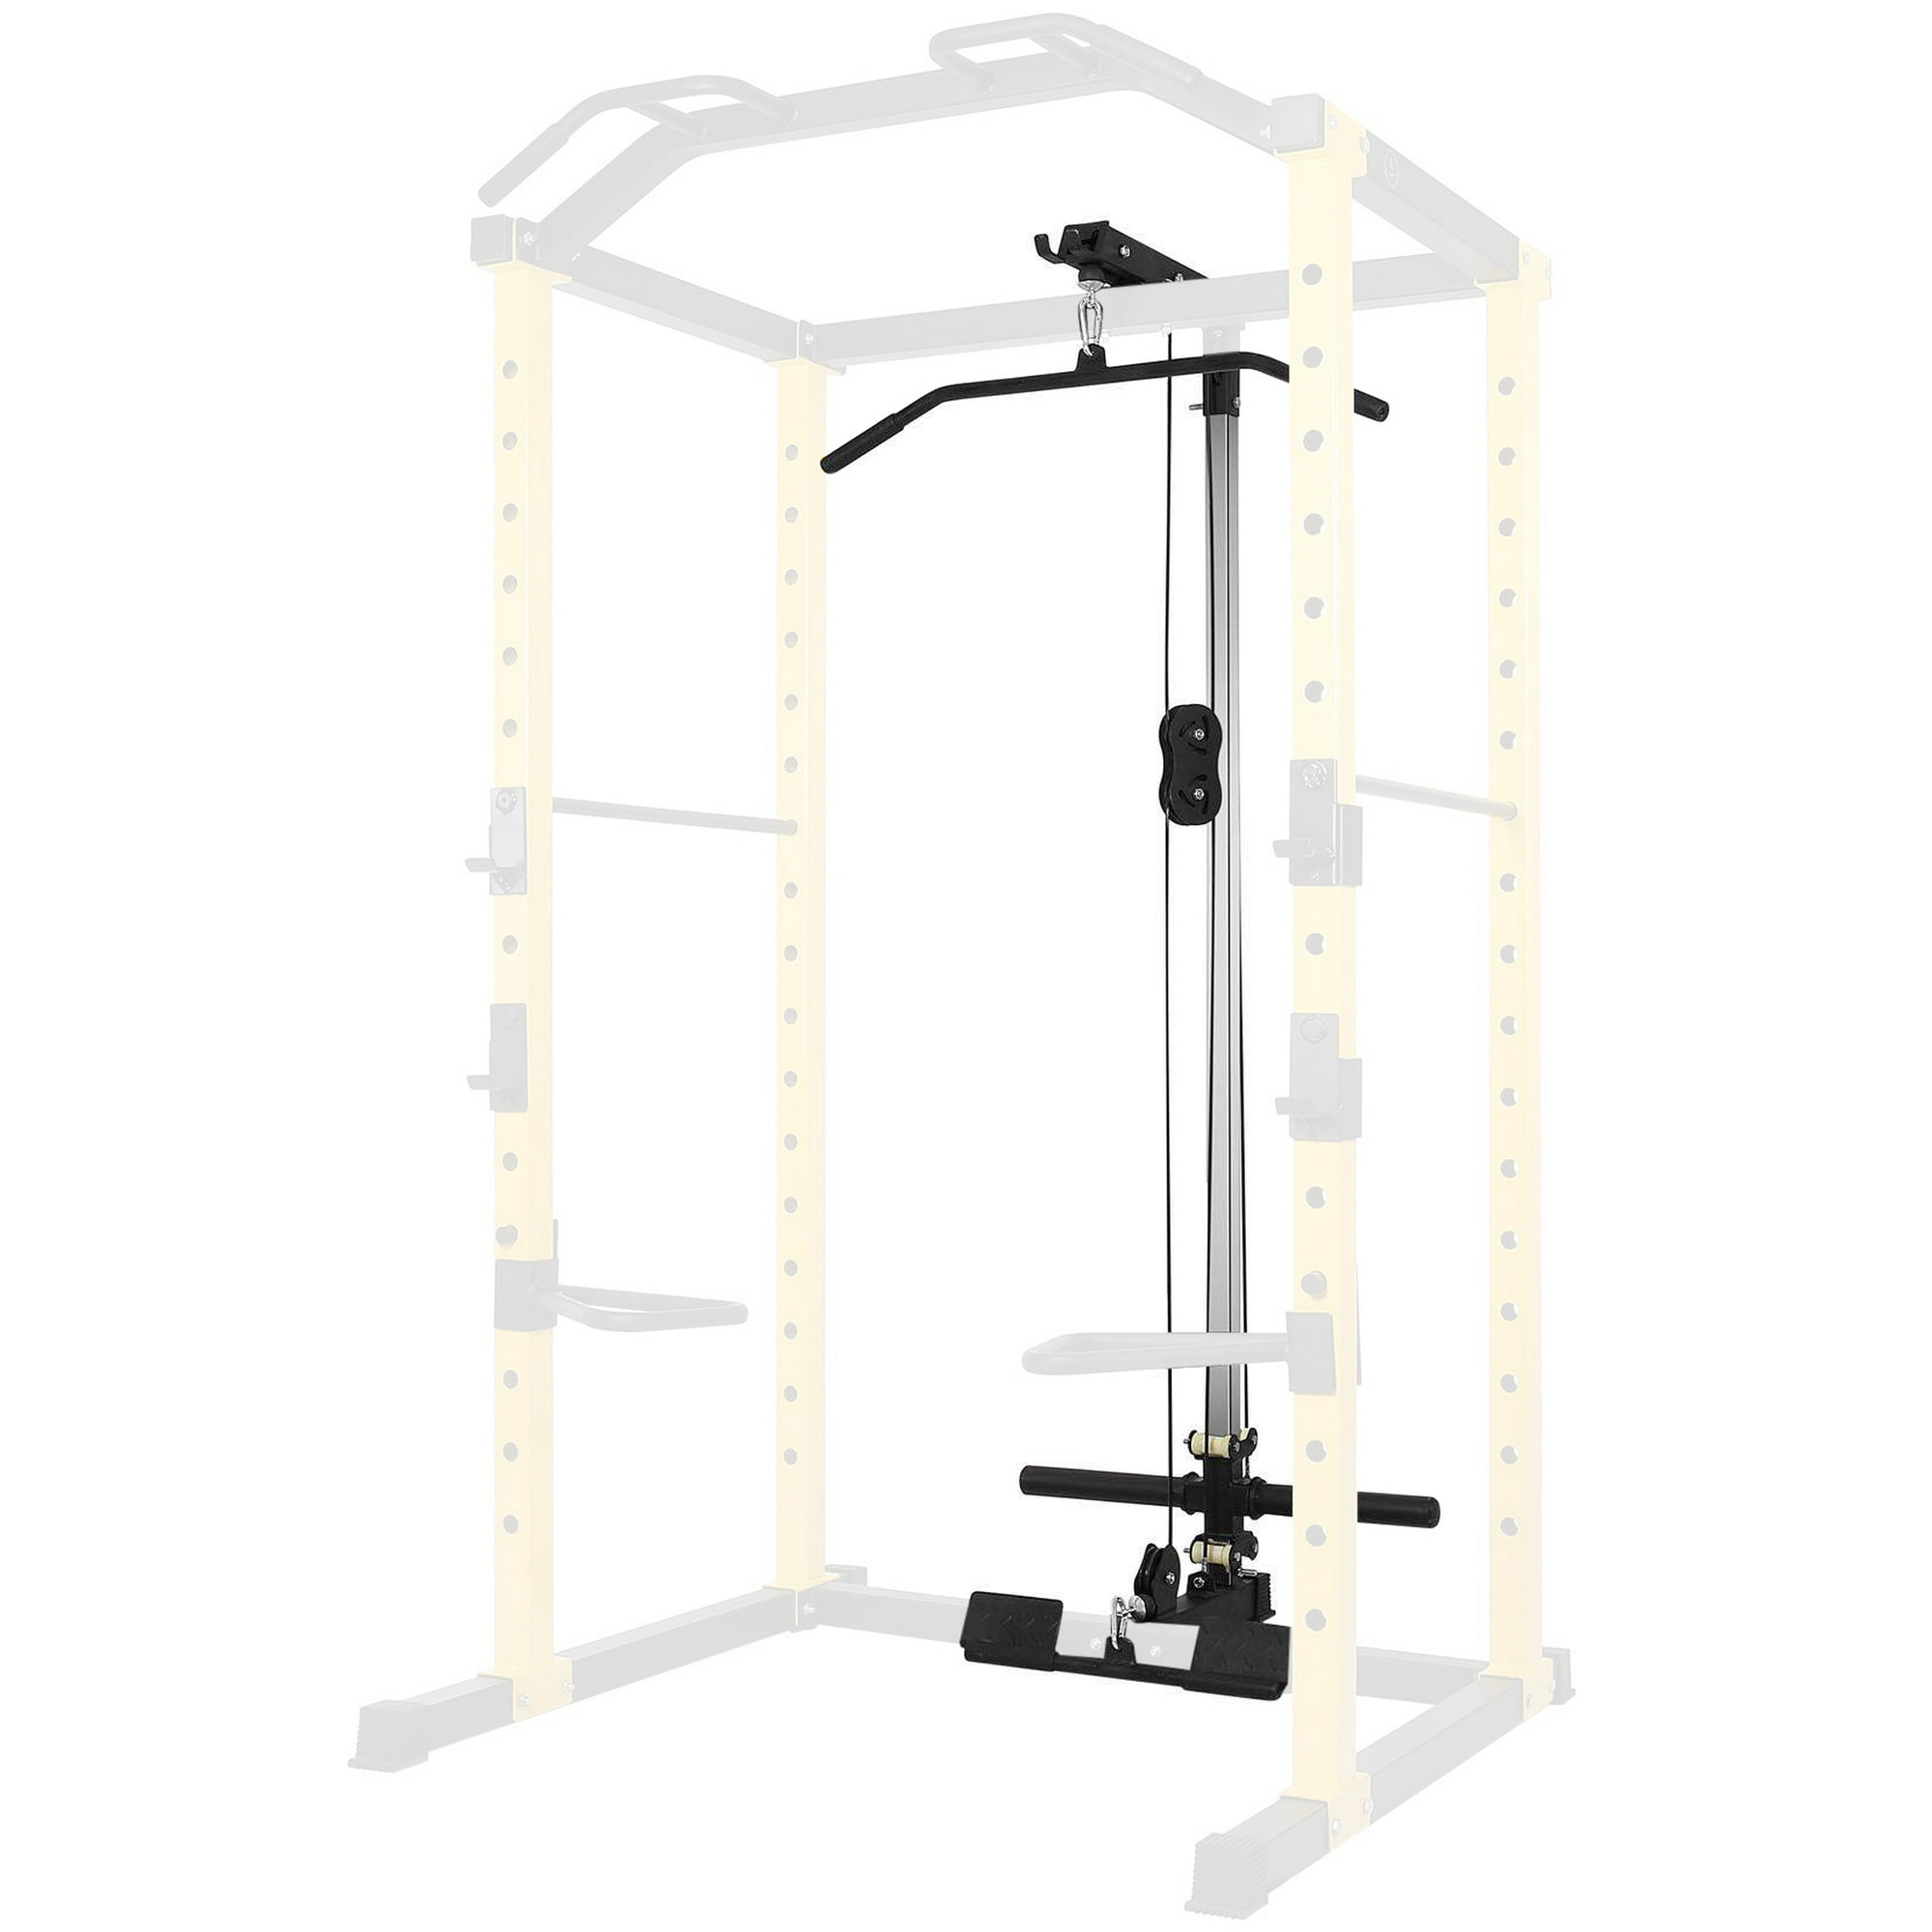 BalanceFrom Lat Pull-Down Attachment for PC-1 Series Squat Rack $75 + Free Shipping